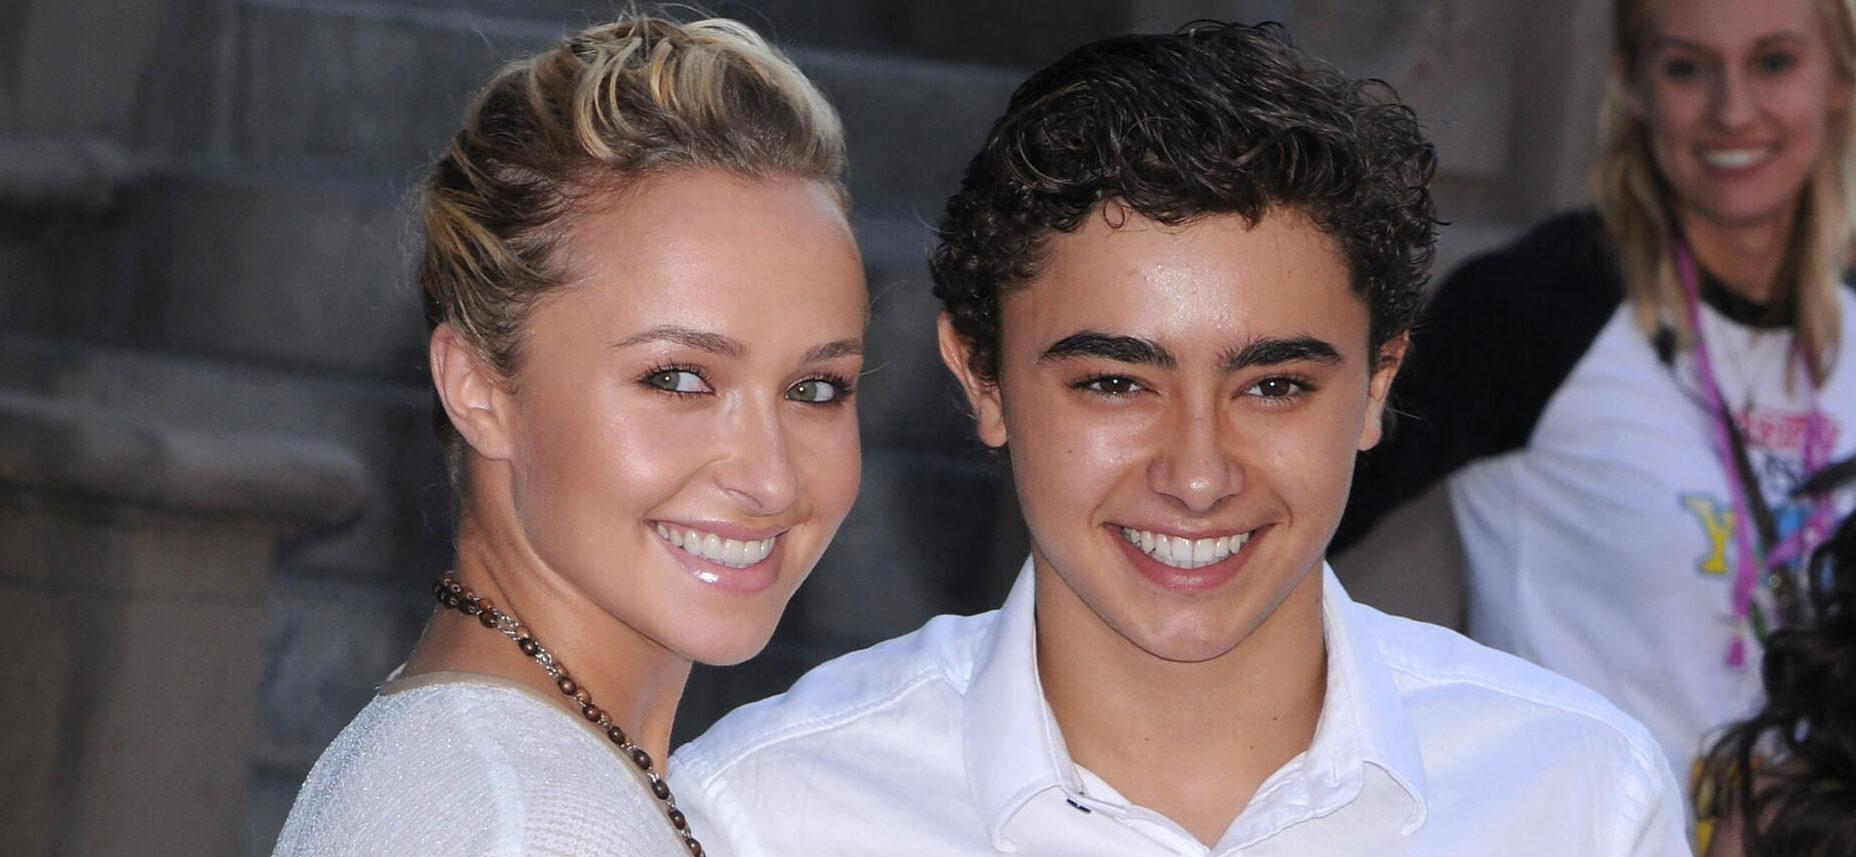 Hayden Panettiere Addresses Brother Jansen’s Passing While Fighting Tears